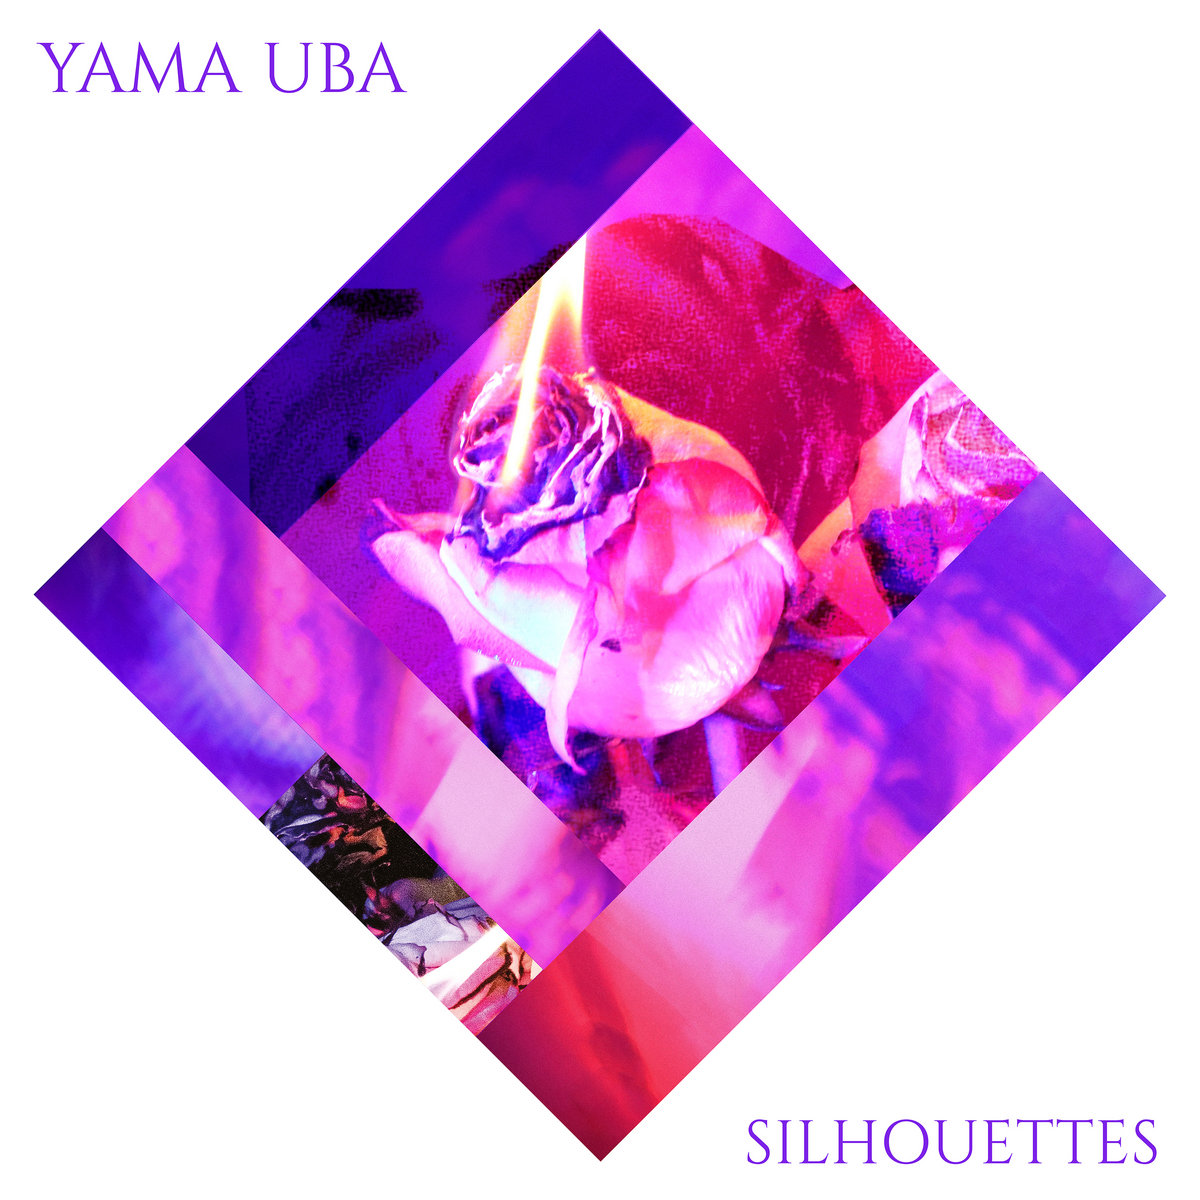 DEBUT ALBUM REVIEW: Silhouettes by Yama Uba